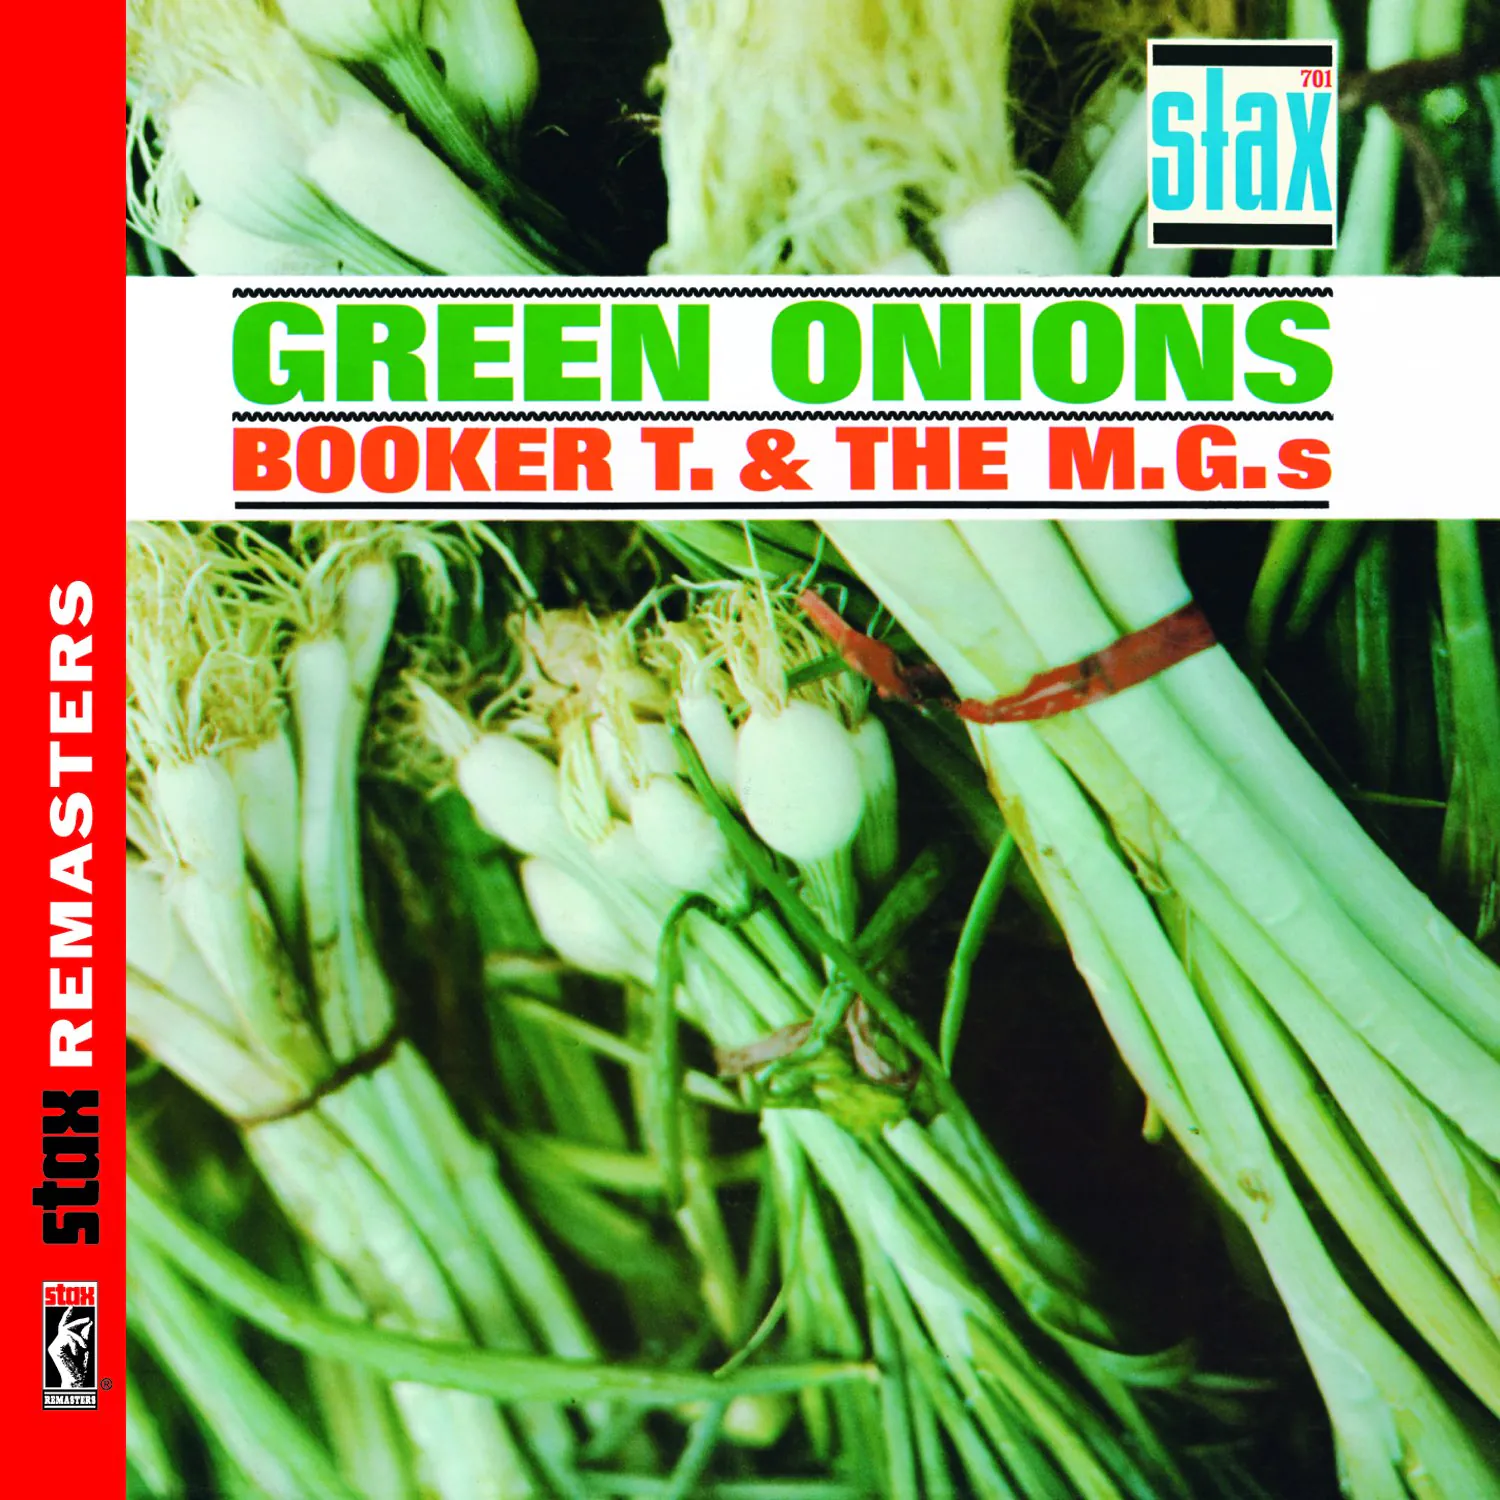 ALBUM REVIEW: Booker T. & The MG’s – Green Onions Deluxe (60th Anniversary)